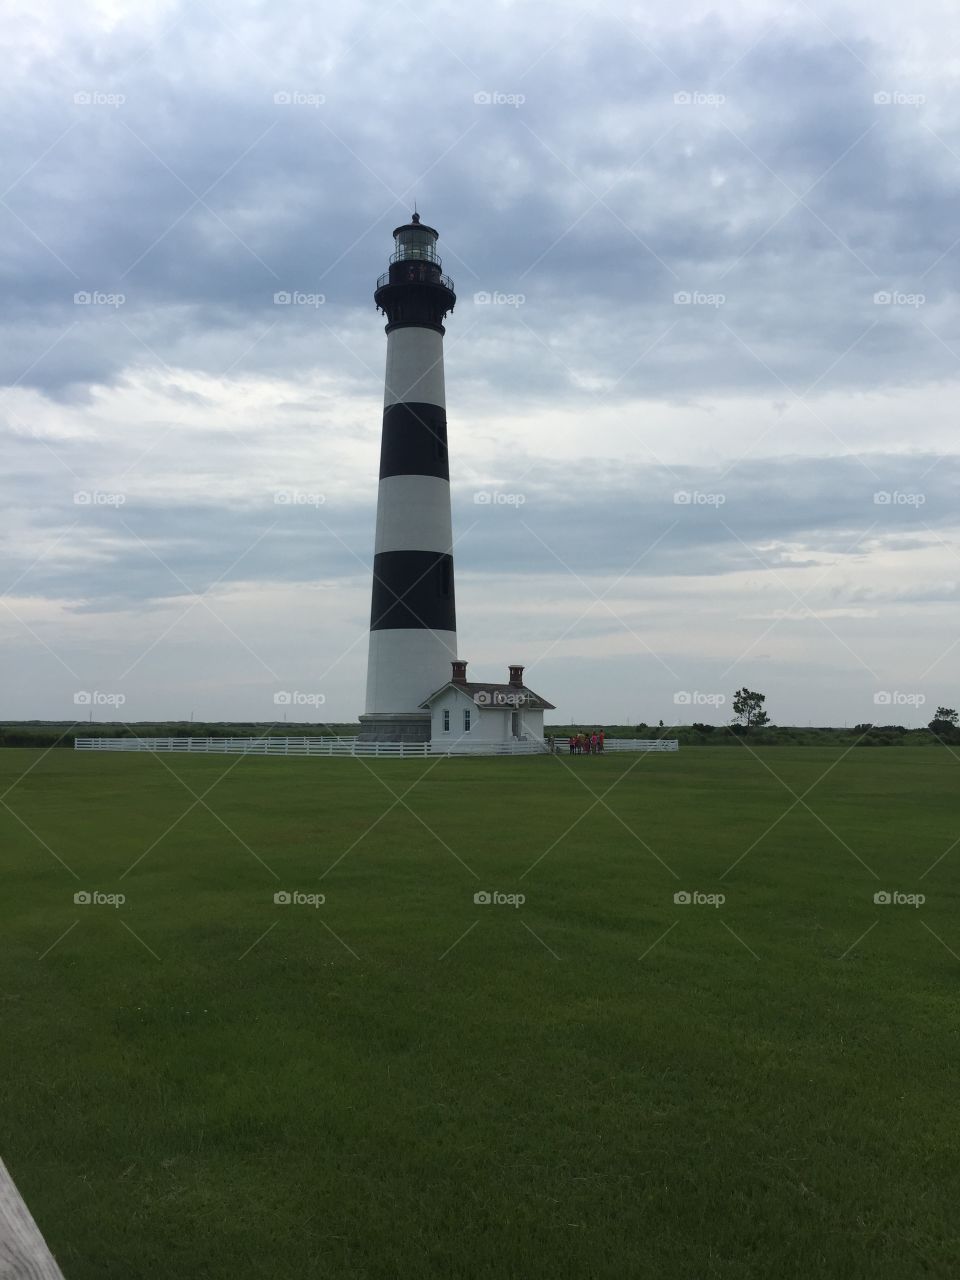 Bodie Island Lighthouse . The Bodie Island Lighthouse is a National Park in North Carolina 